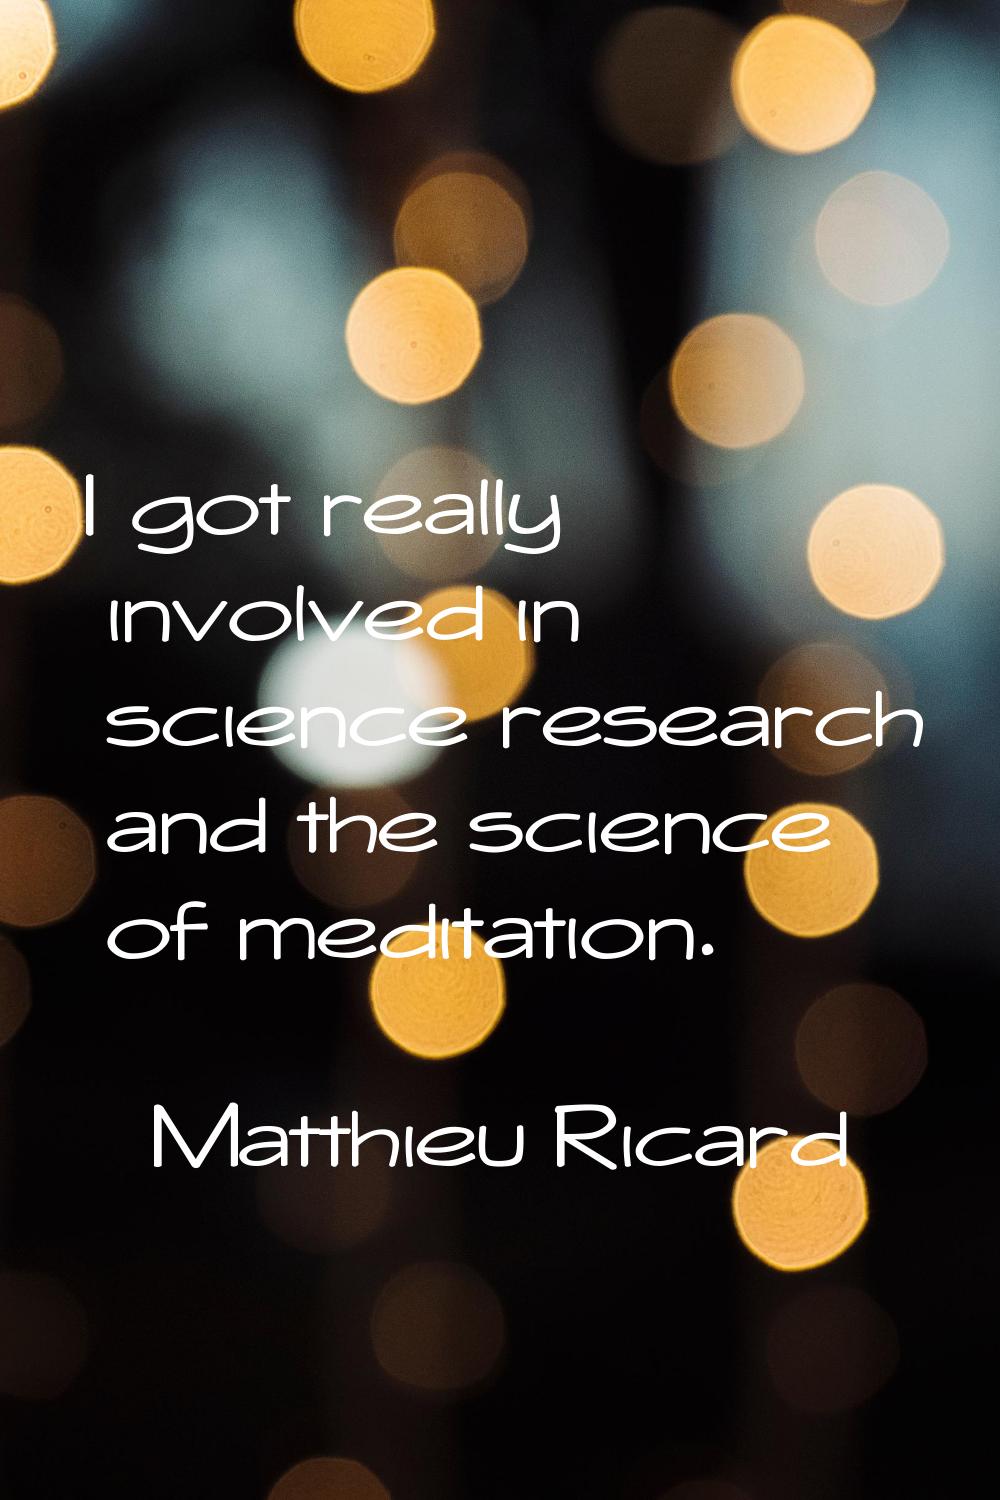 I got really involved in science research and the science of meditation.